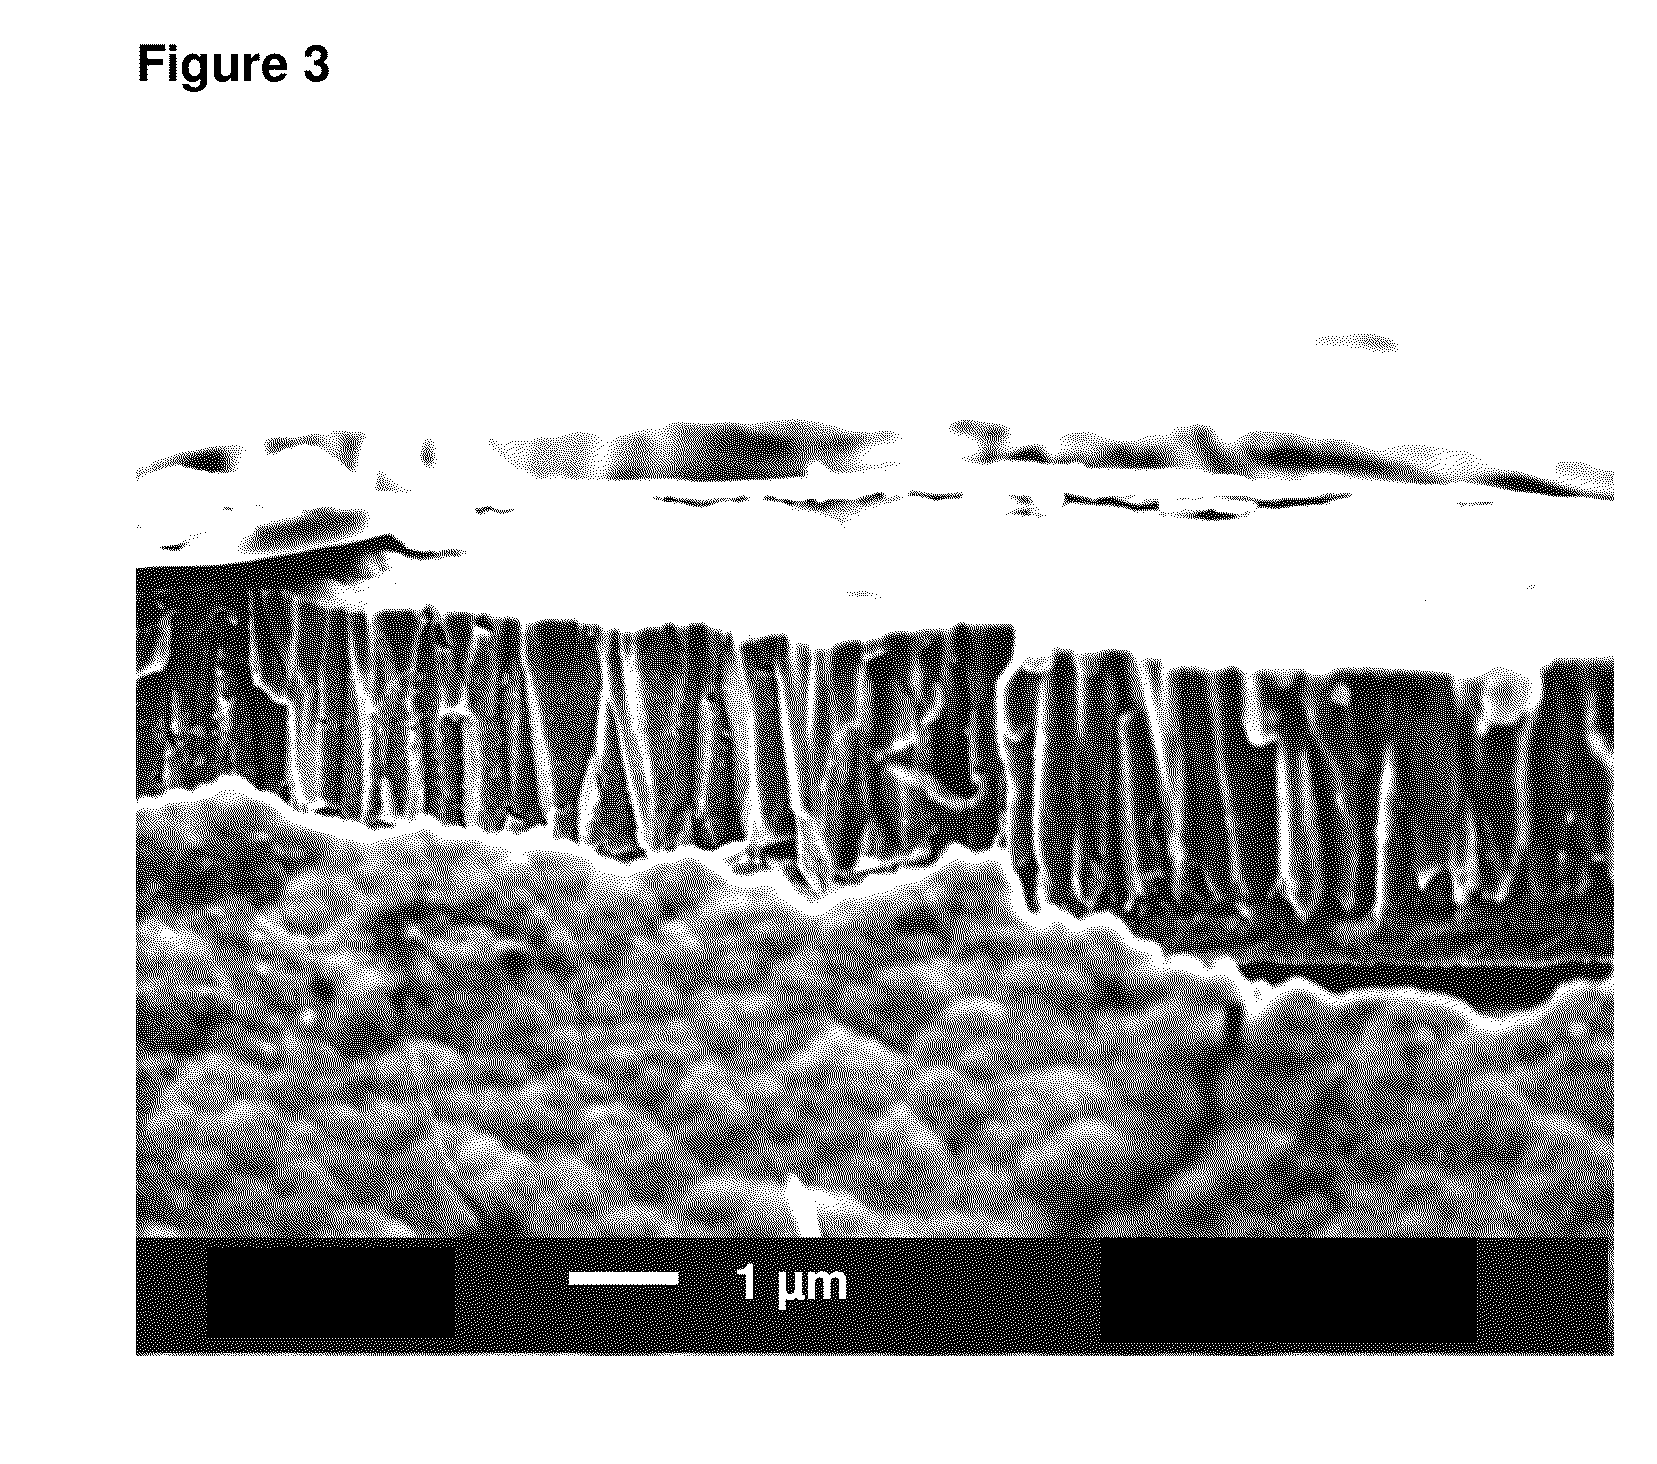 Method for electroless nickel-phosphorous alloy deposition onto flexible substrates